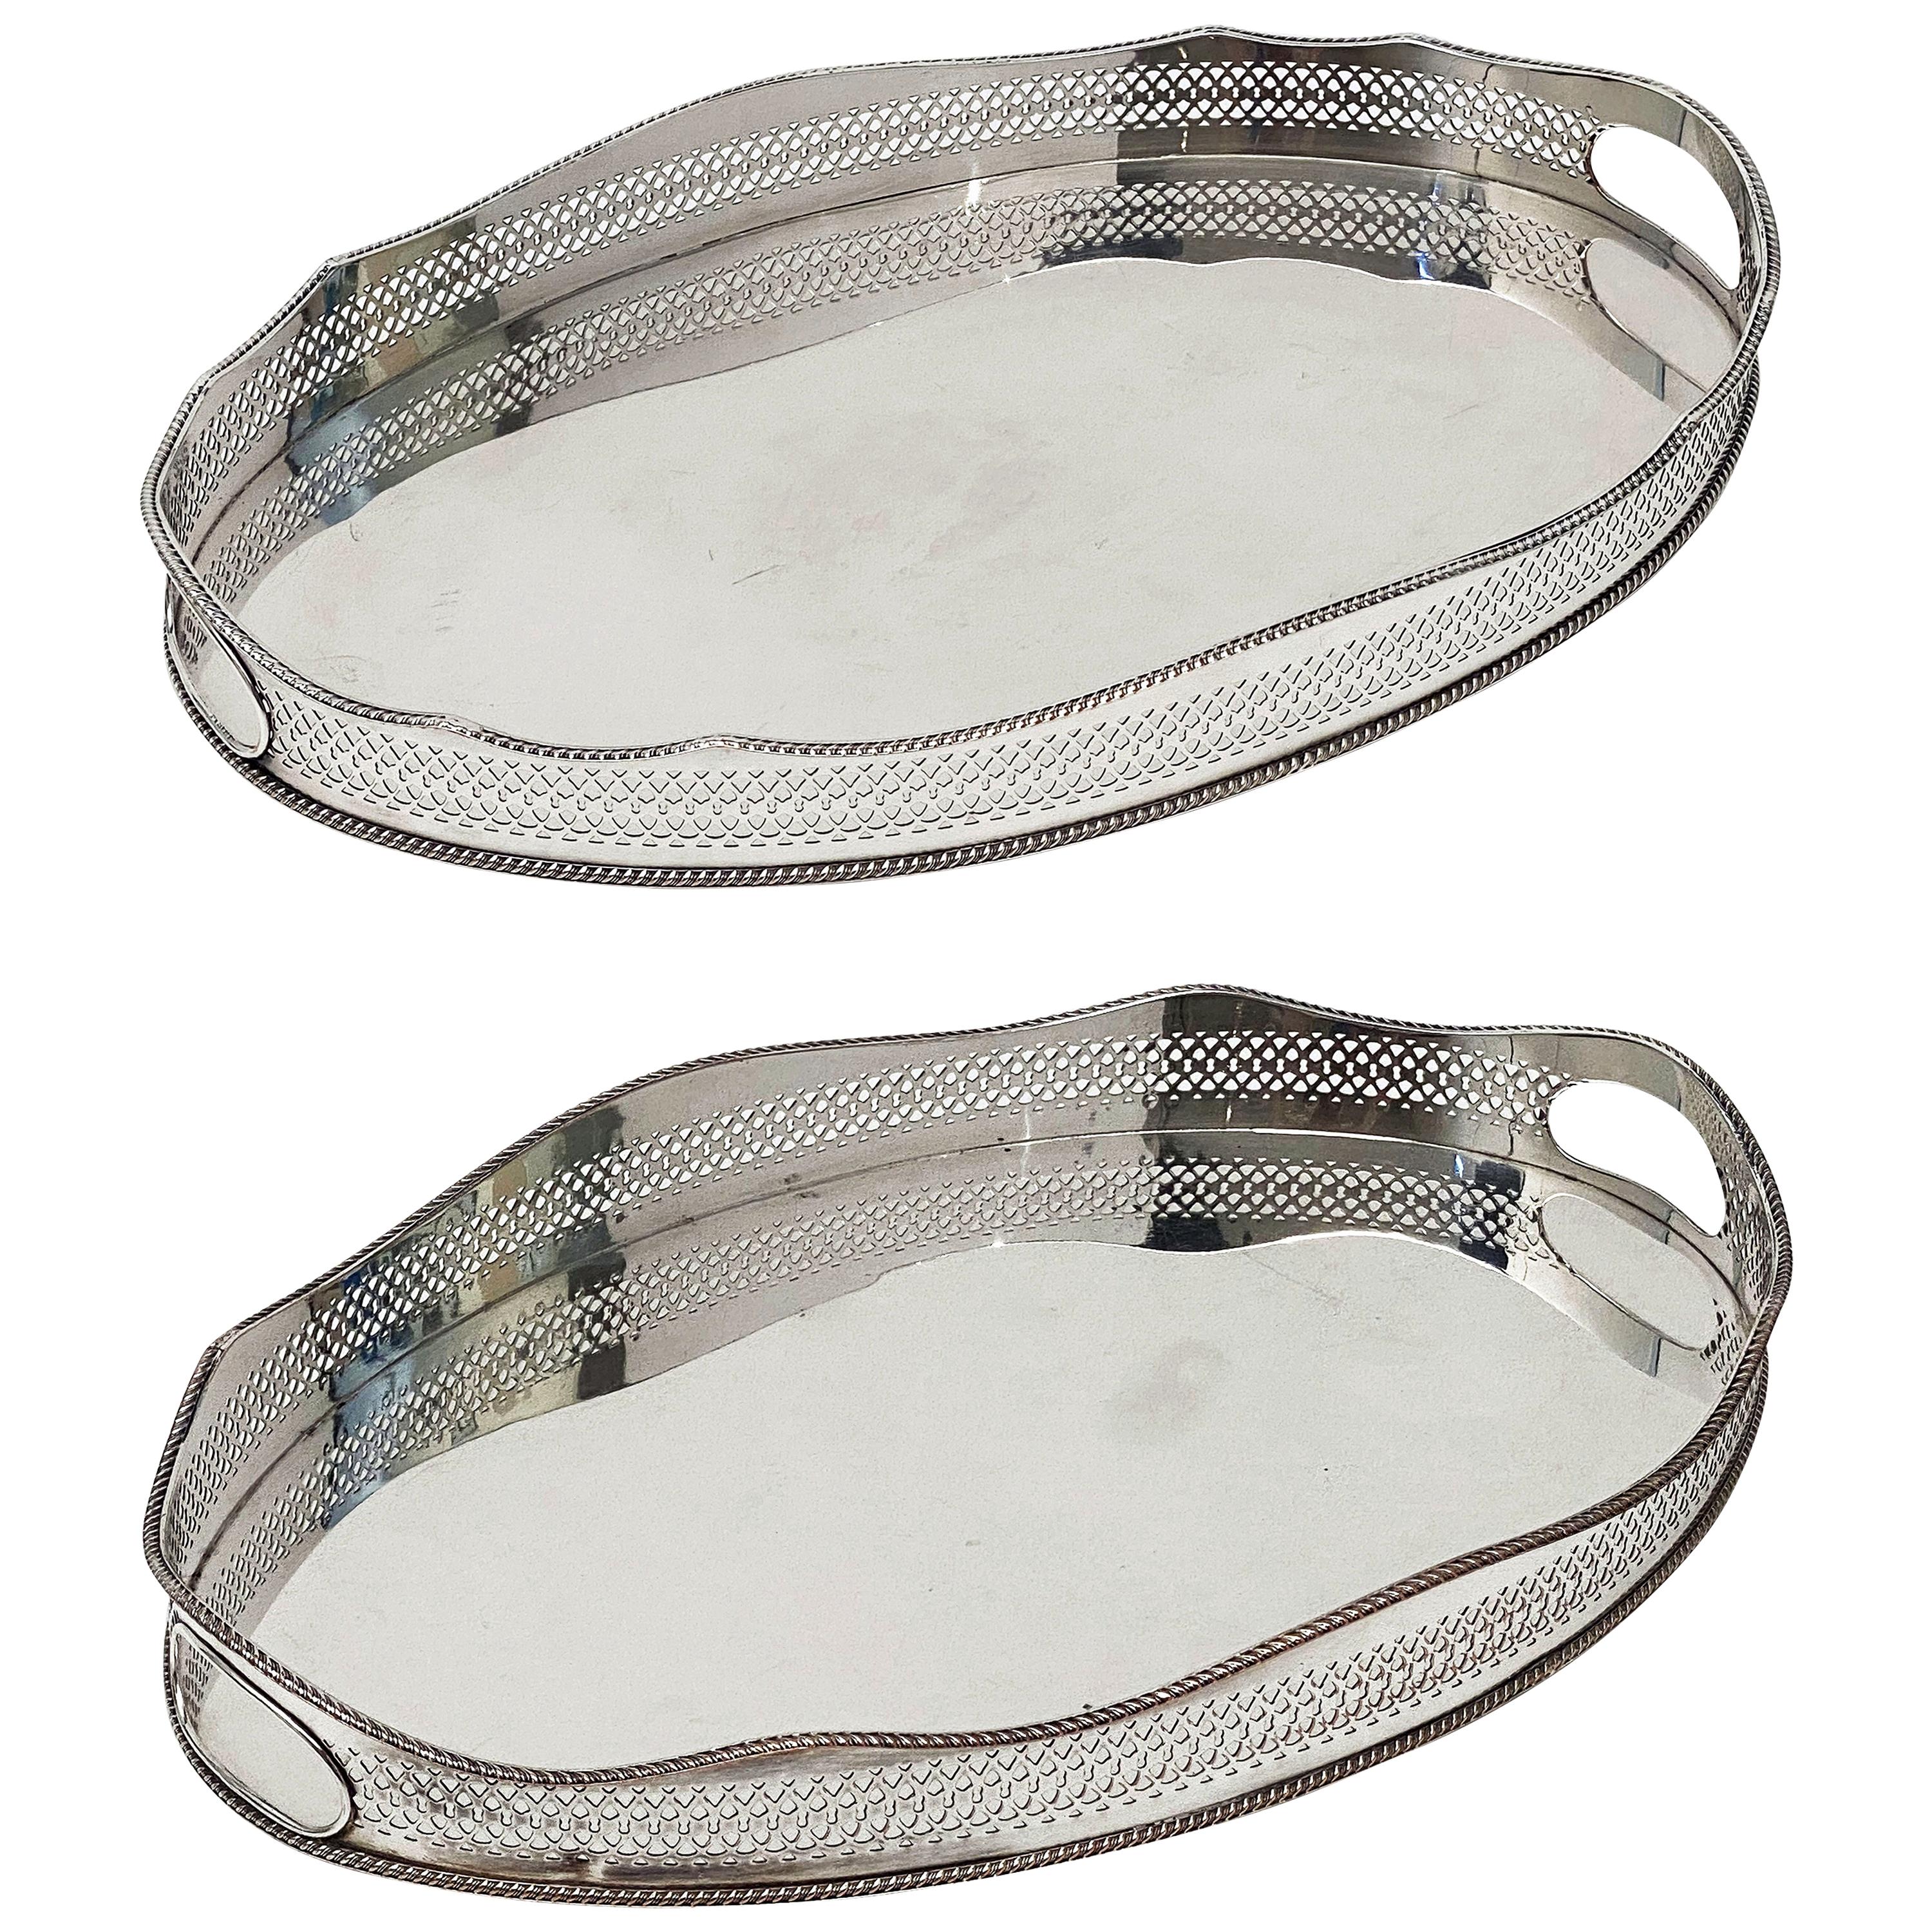 Pair of English Silver Oval Gallery Serving or Drinks Trays 'Priced as a Pair'